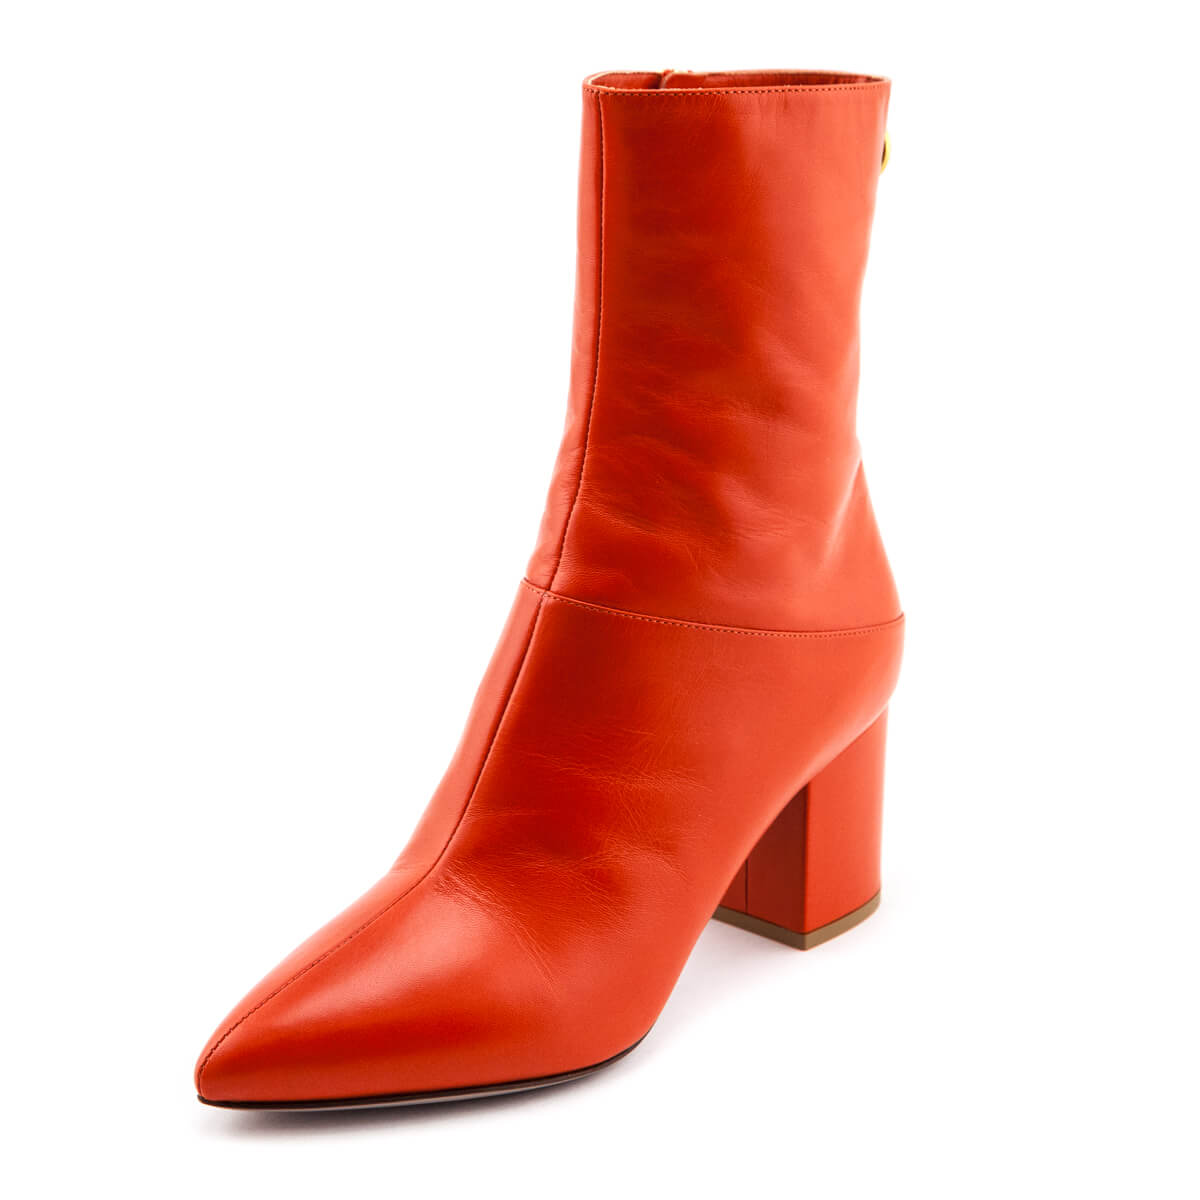 Valentino Orange Leather Ringstud Ankle Boots Size US 6 | EU 36 - Love that Bag etc - Preowned Authentic Designer Handbags & Preloved Fashions